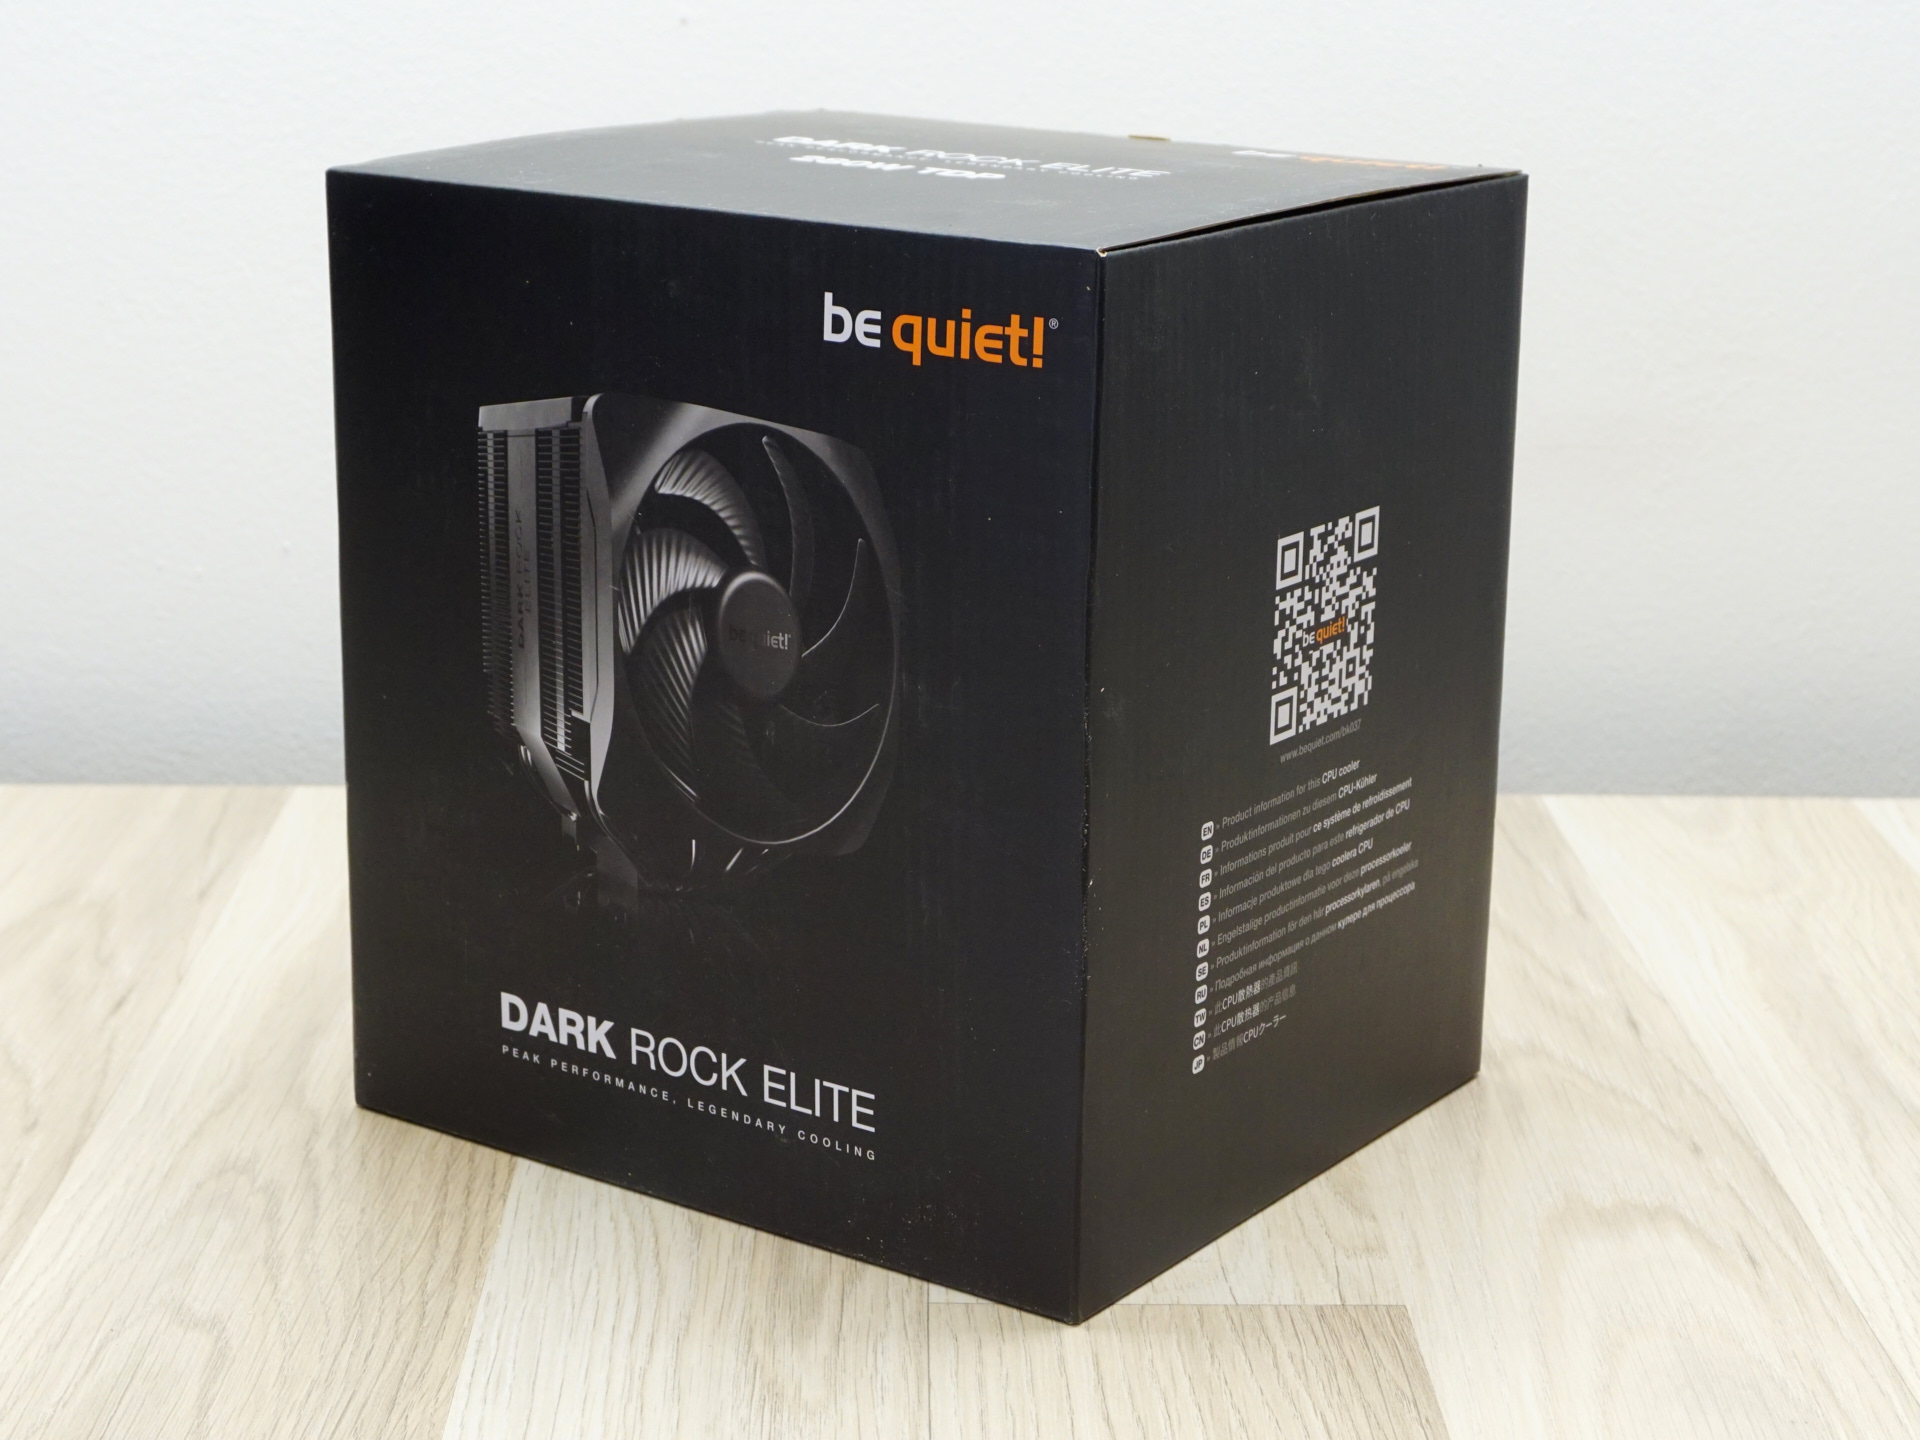 Products from be quiet